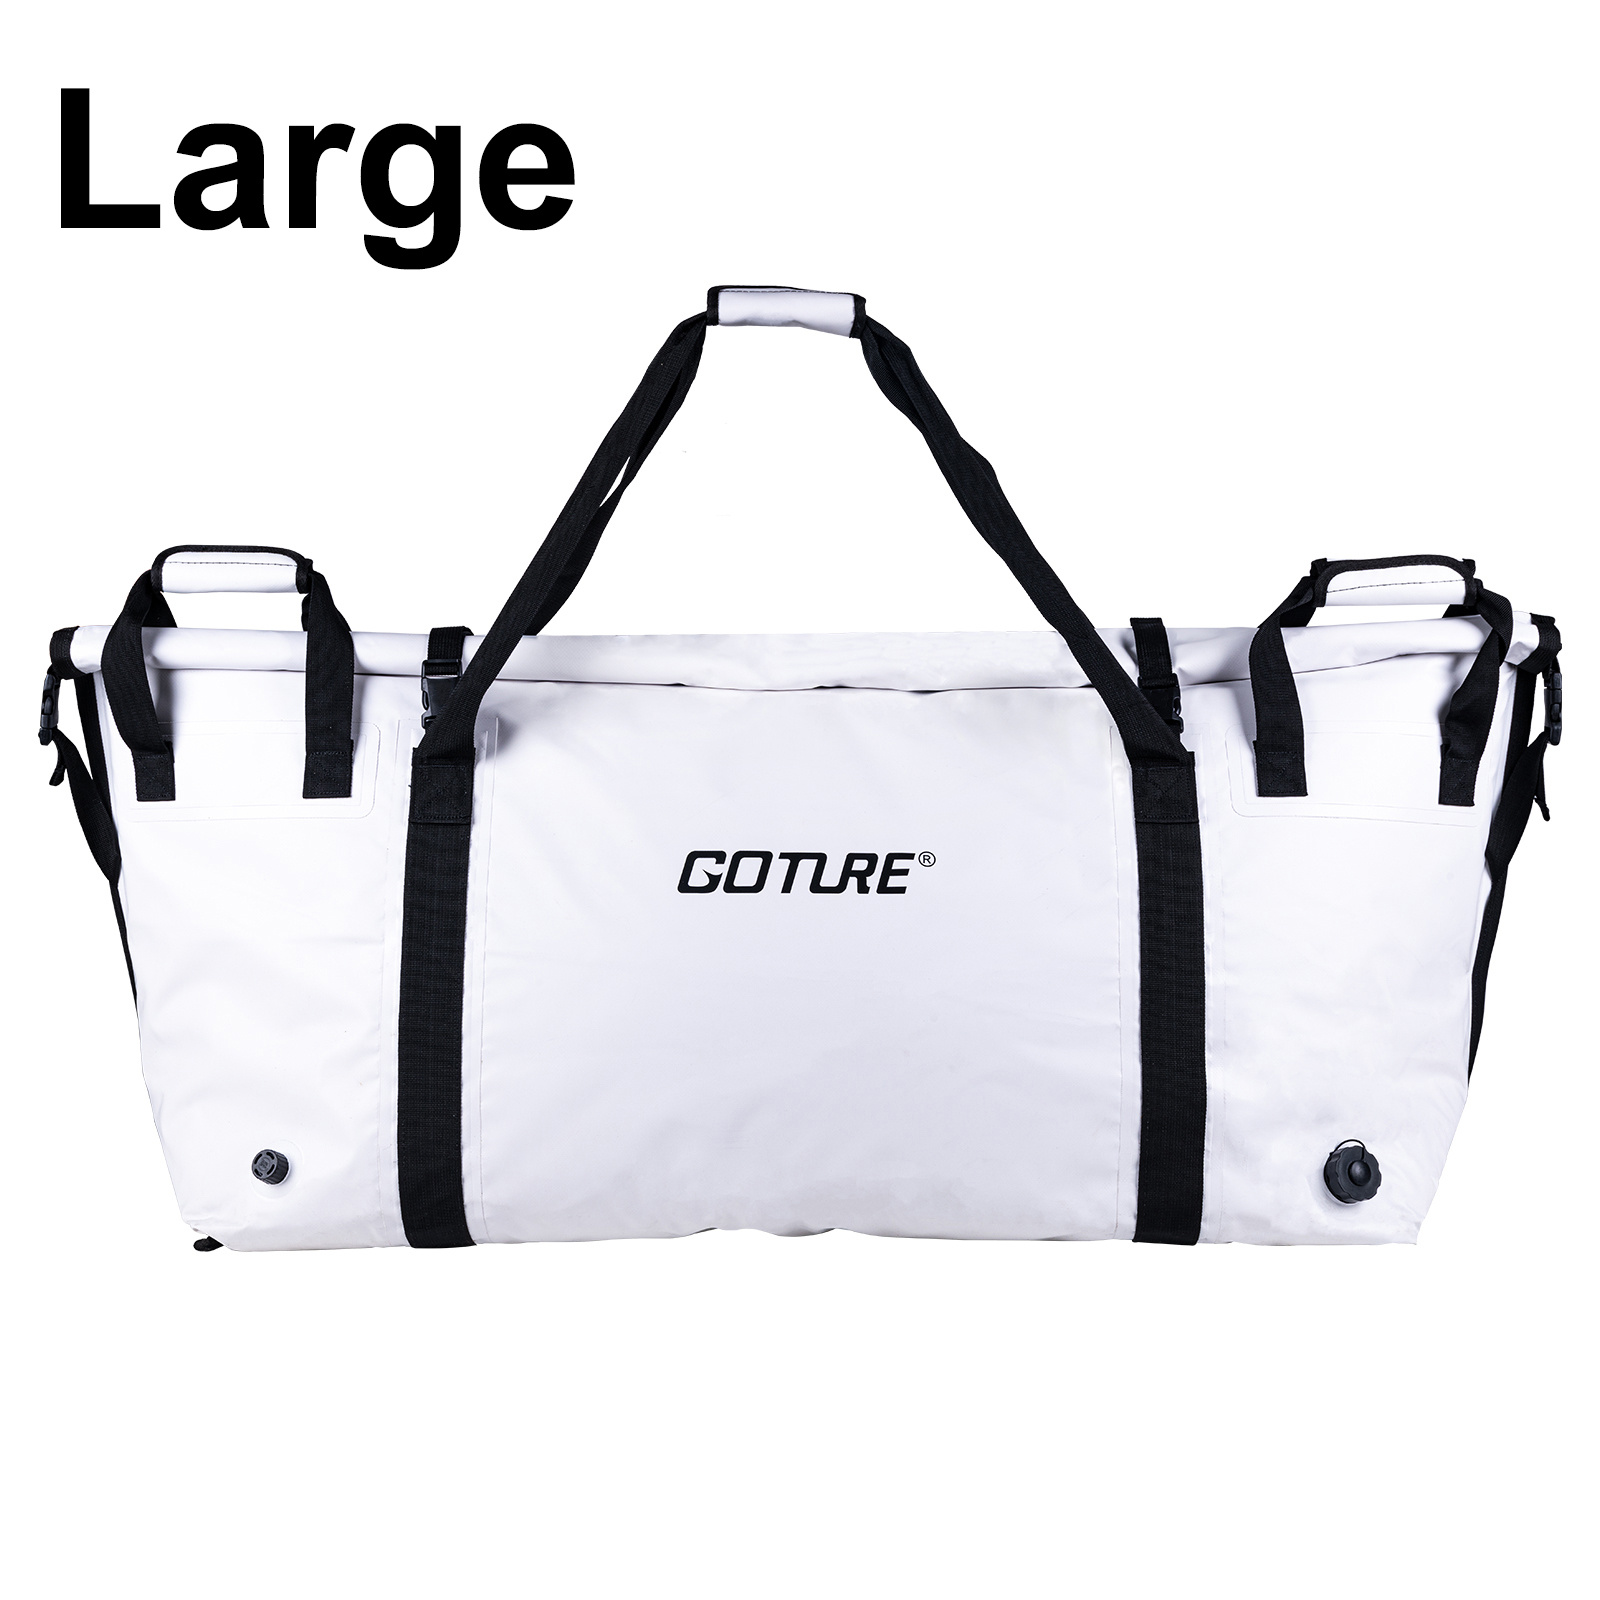 Fish Kill Bags Cooler Bag Insulated Leakproof Double Wall Waterproof Large  Portable Fish Bag with Easy Grip and Carry Handles for Fishing & Keep Fresh